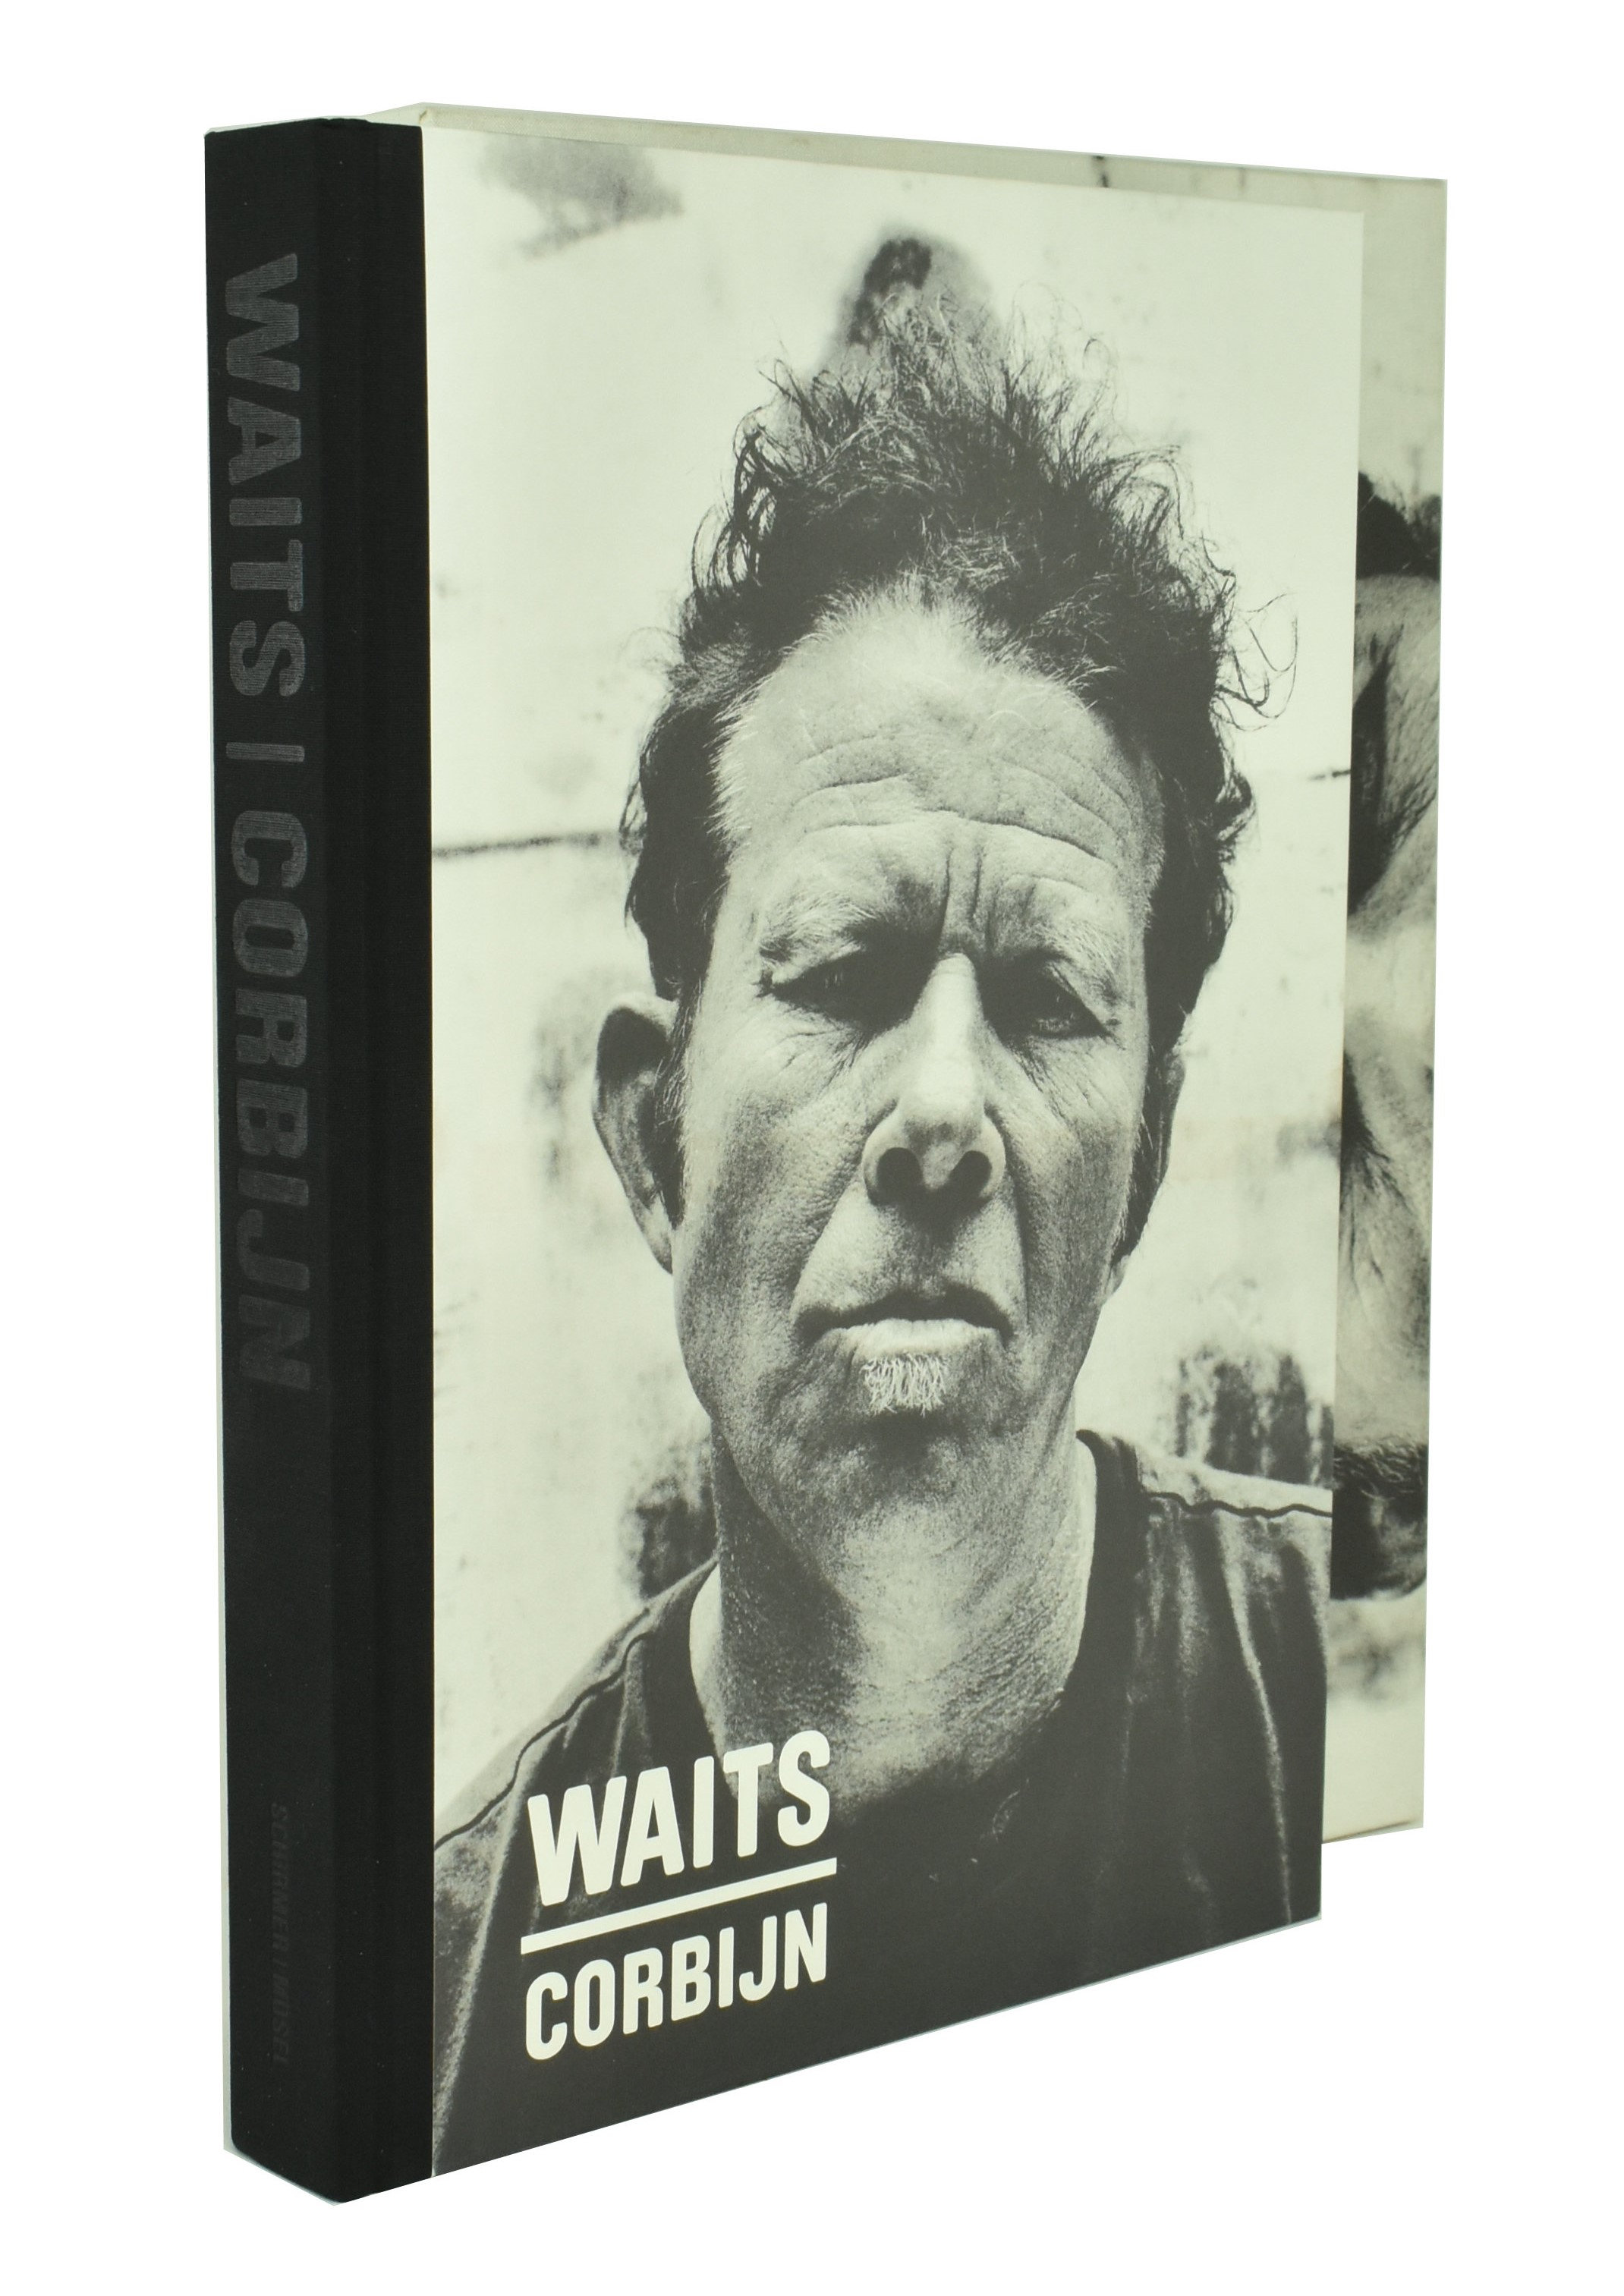 WAITS BY CORBIJN. LIMITED EDITION ON TOM WAITS IN SLIPCASE - Image 2 of 7